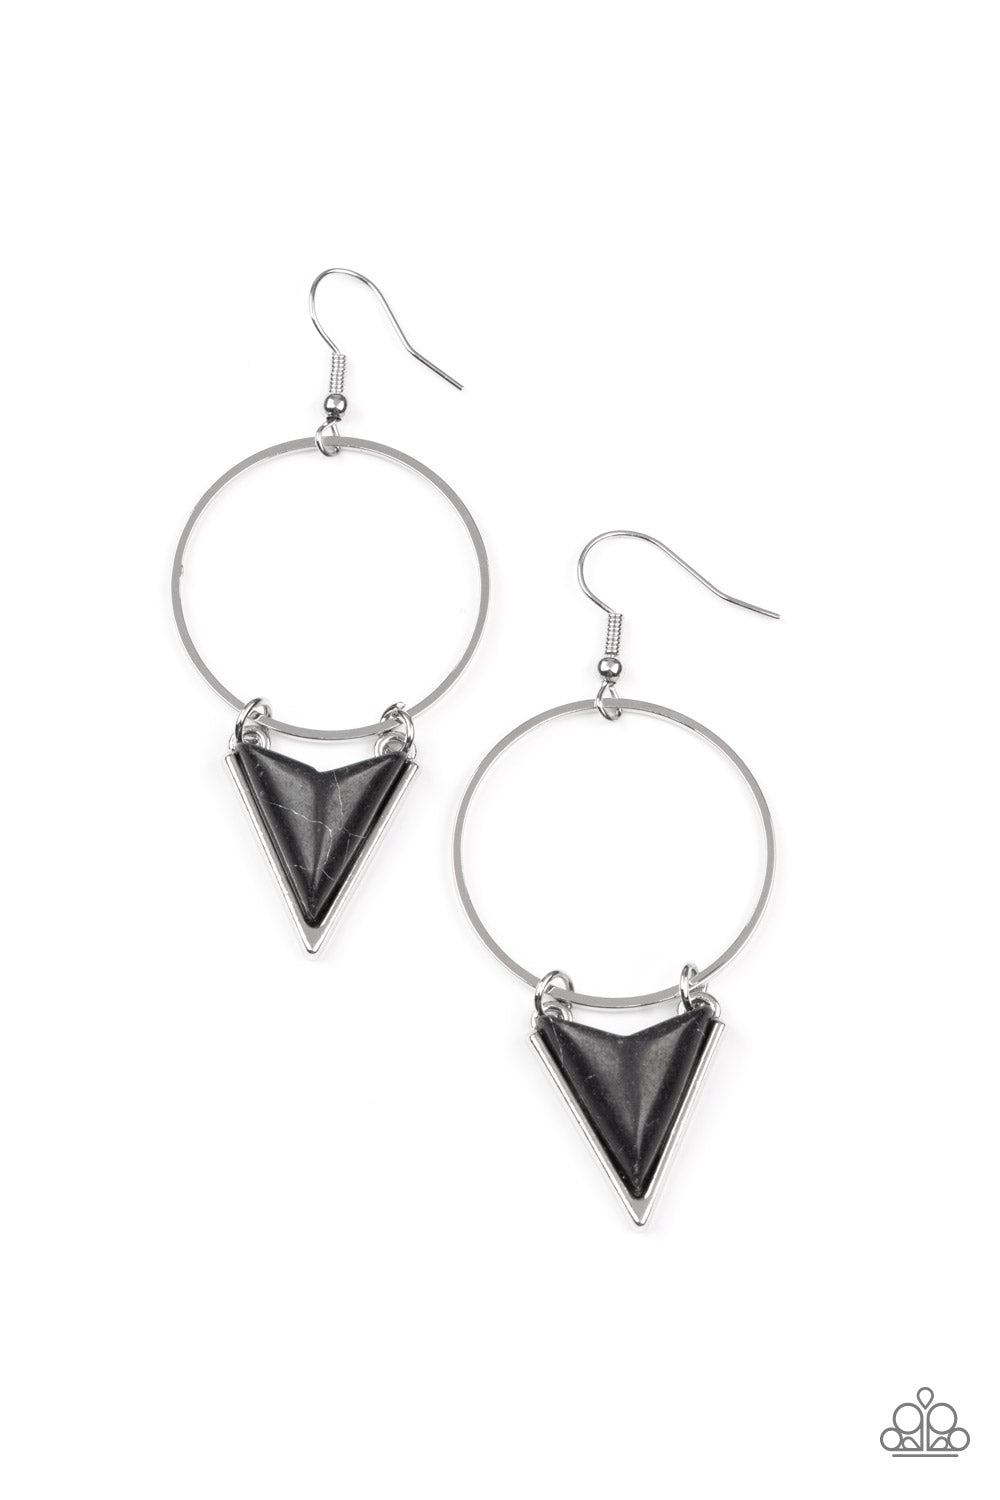 Sahara Shark Black Stone Earring - Paparazzi Accessories  Featuring a sleek silver fitting, a triangular cut black stone swings from the bottom of an airy silver hoop for an edgy seasonal look. Earring attaches to a standard fishhook fitting.  Sold as one pair of earrings.